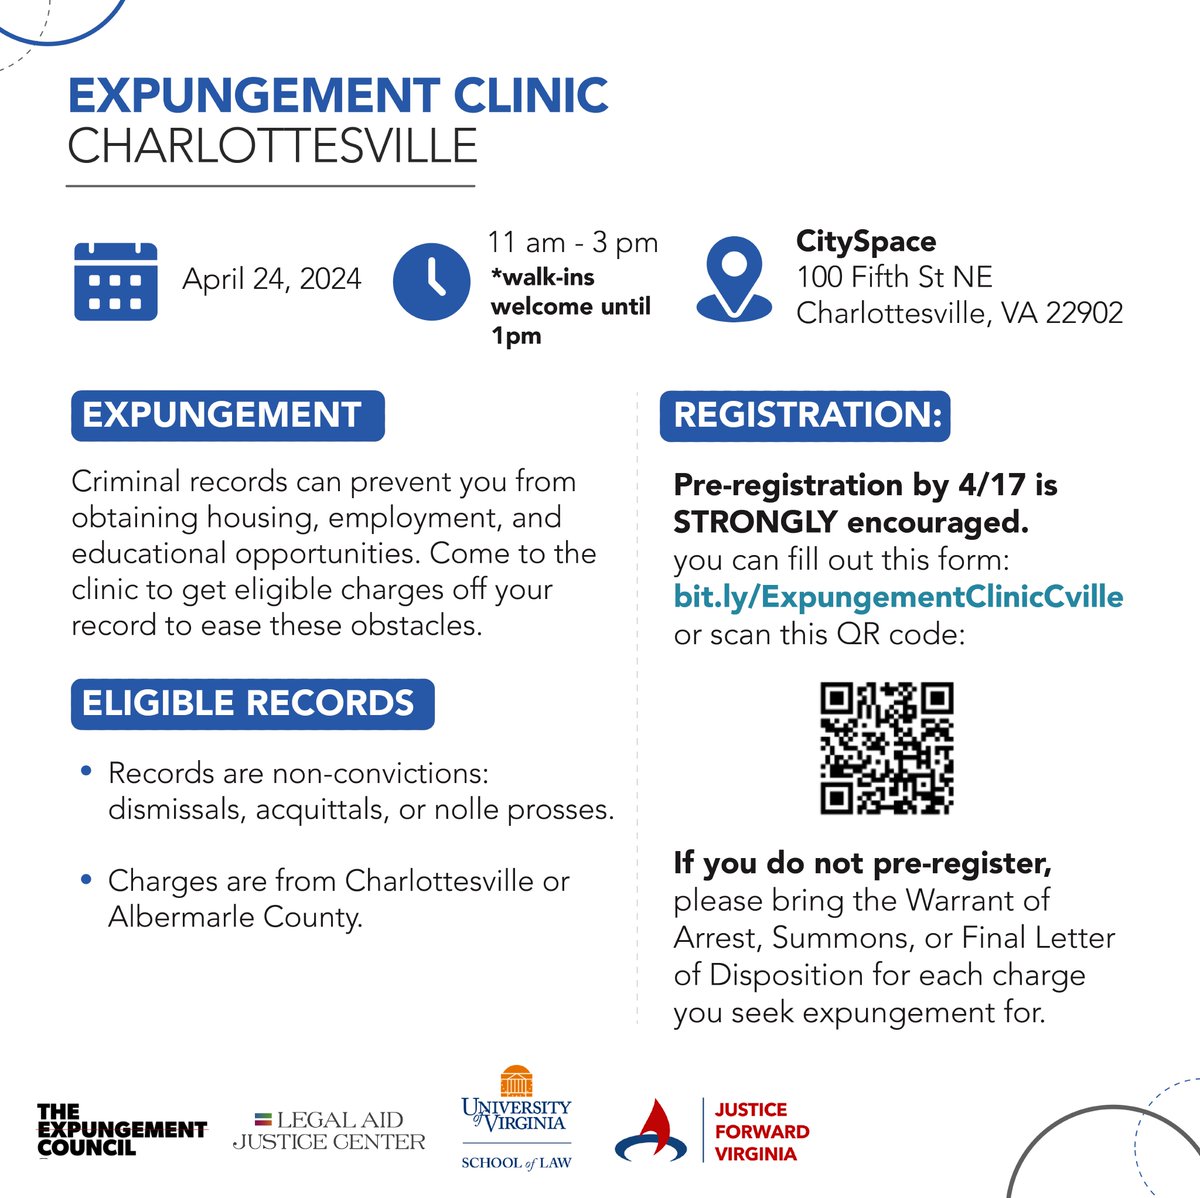 On 04/24 in #Charlottesville we will be partnering with several organizations to host an expungement clinic where we will help people remove eligible charges from their criminal record! Pre-registration is encouraged, RSVP here: bit.ly/ExpungementCli…